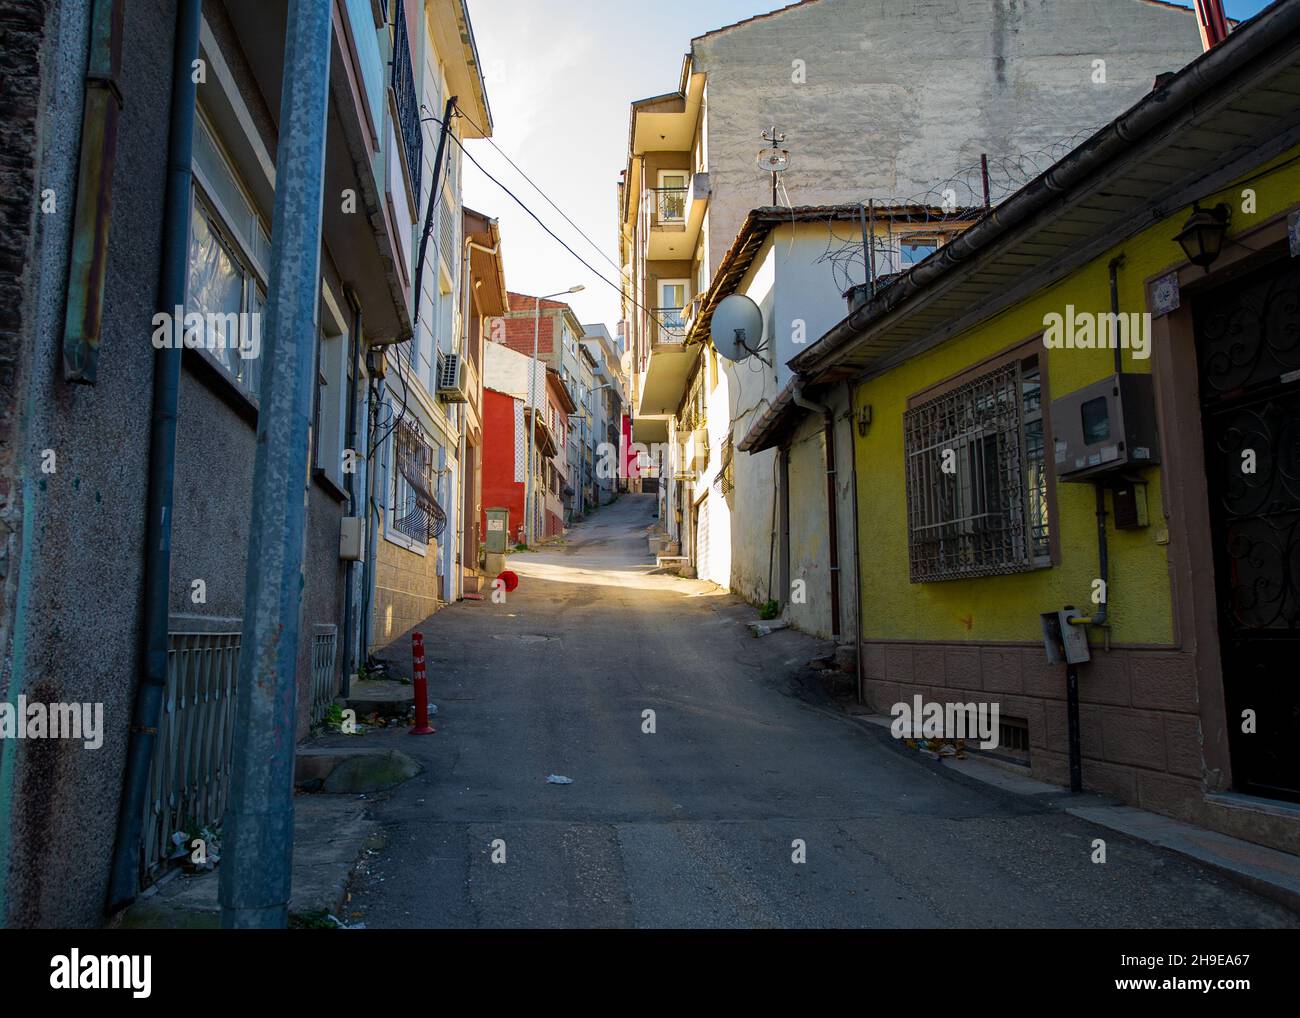 Street in Bursa town in a hilltop neighborhood with colorful houses Stock Photo